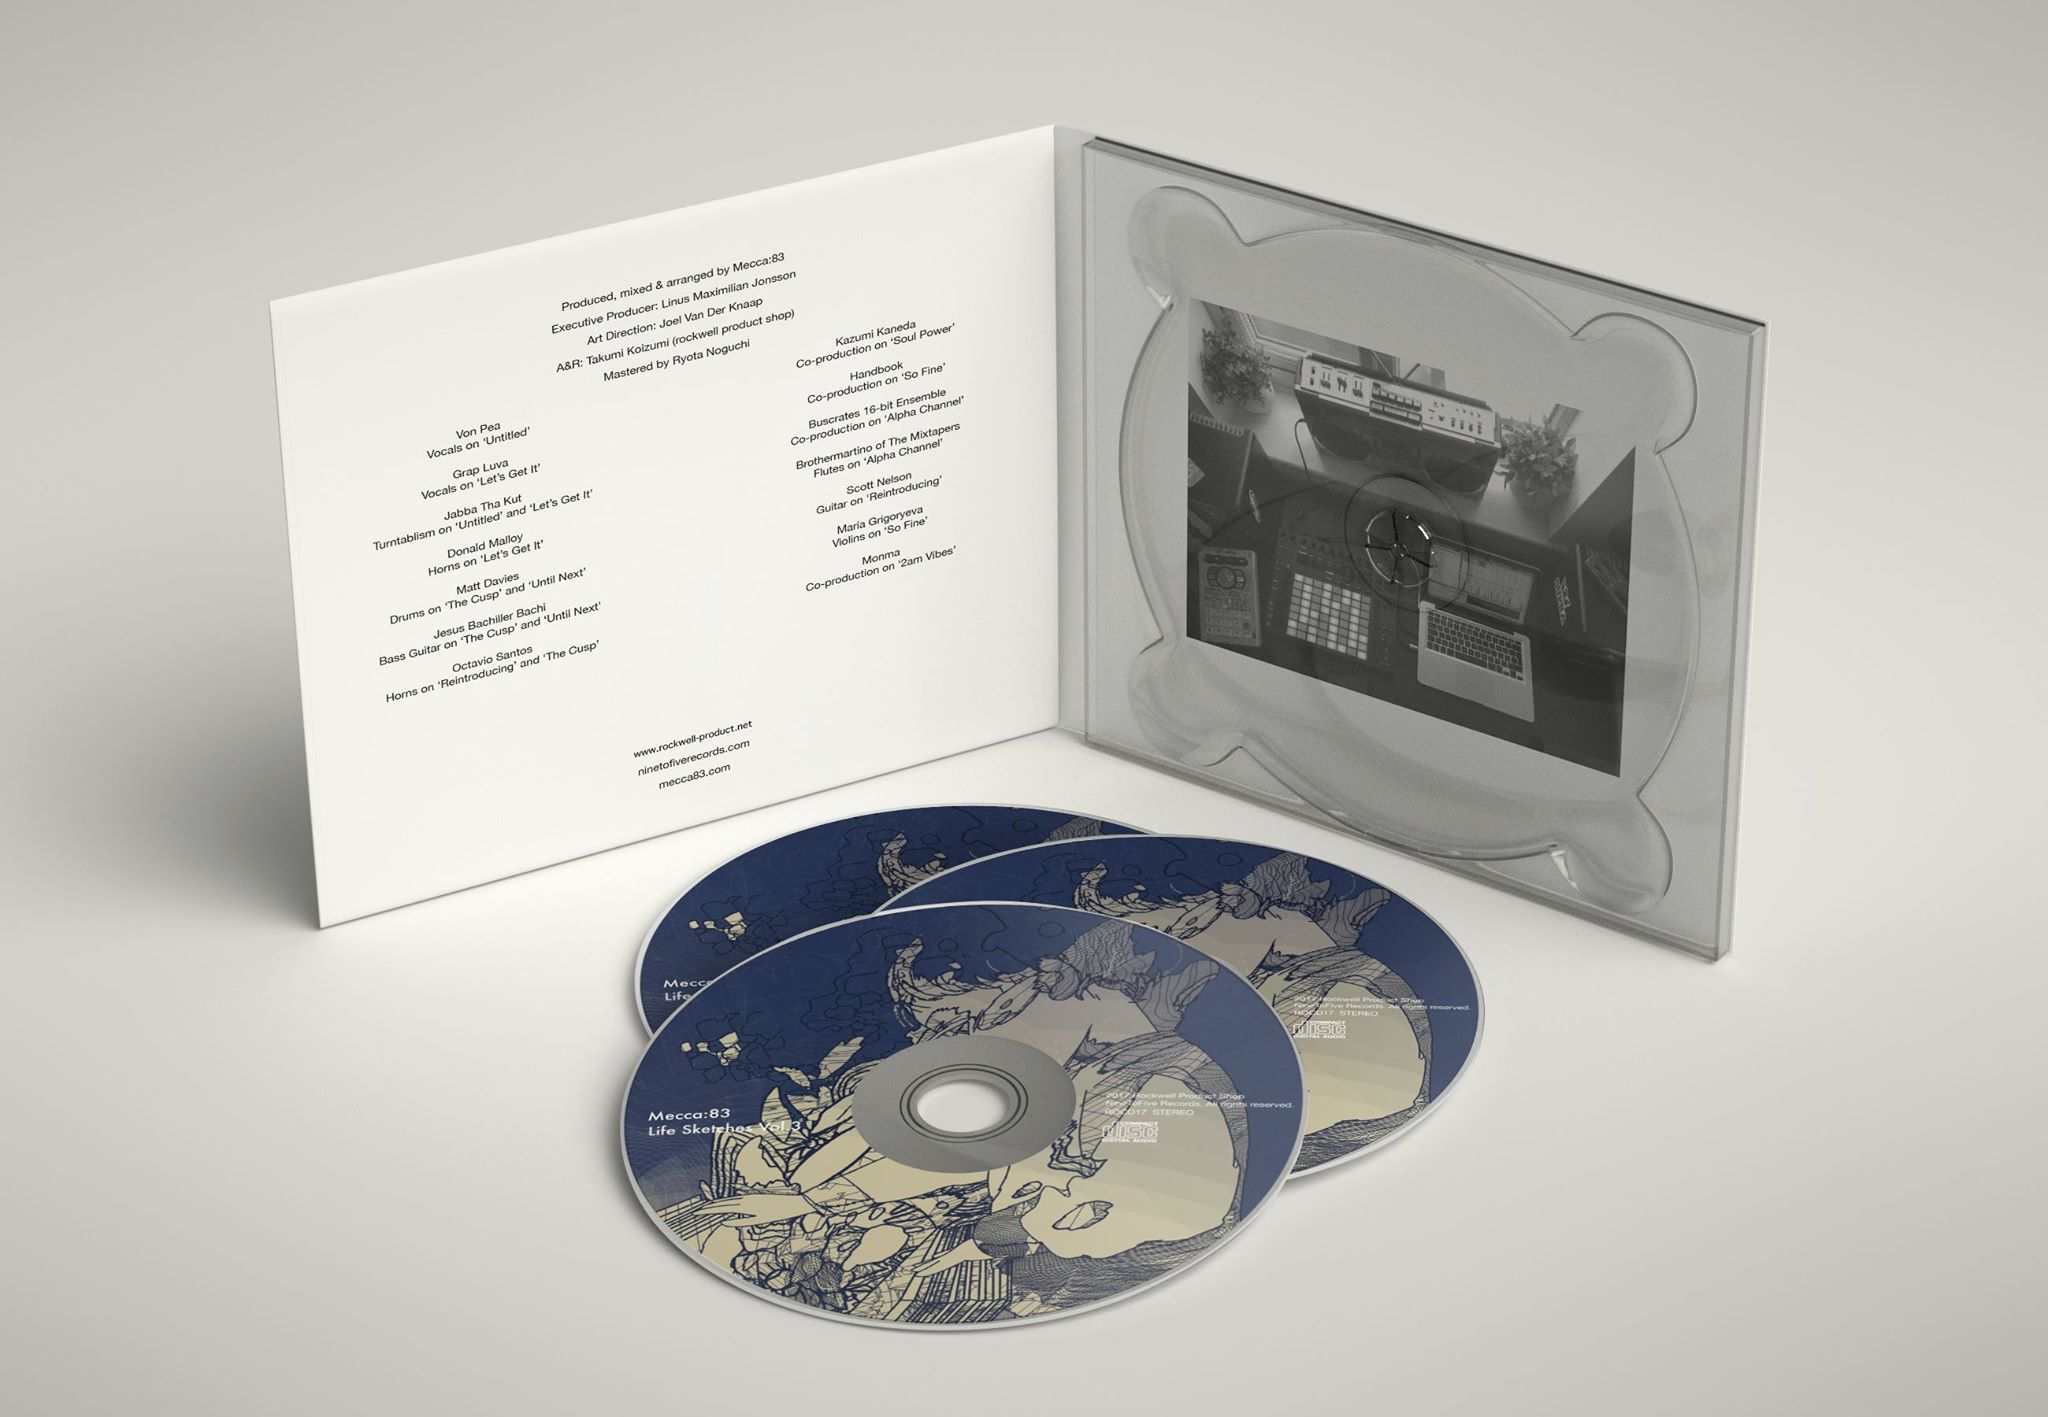 Mecca:83 - Life Sketches Volume. 3 - Pre order the CD (Read Now ...